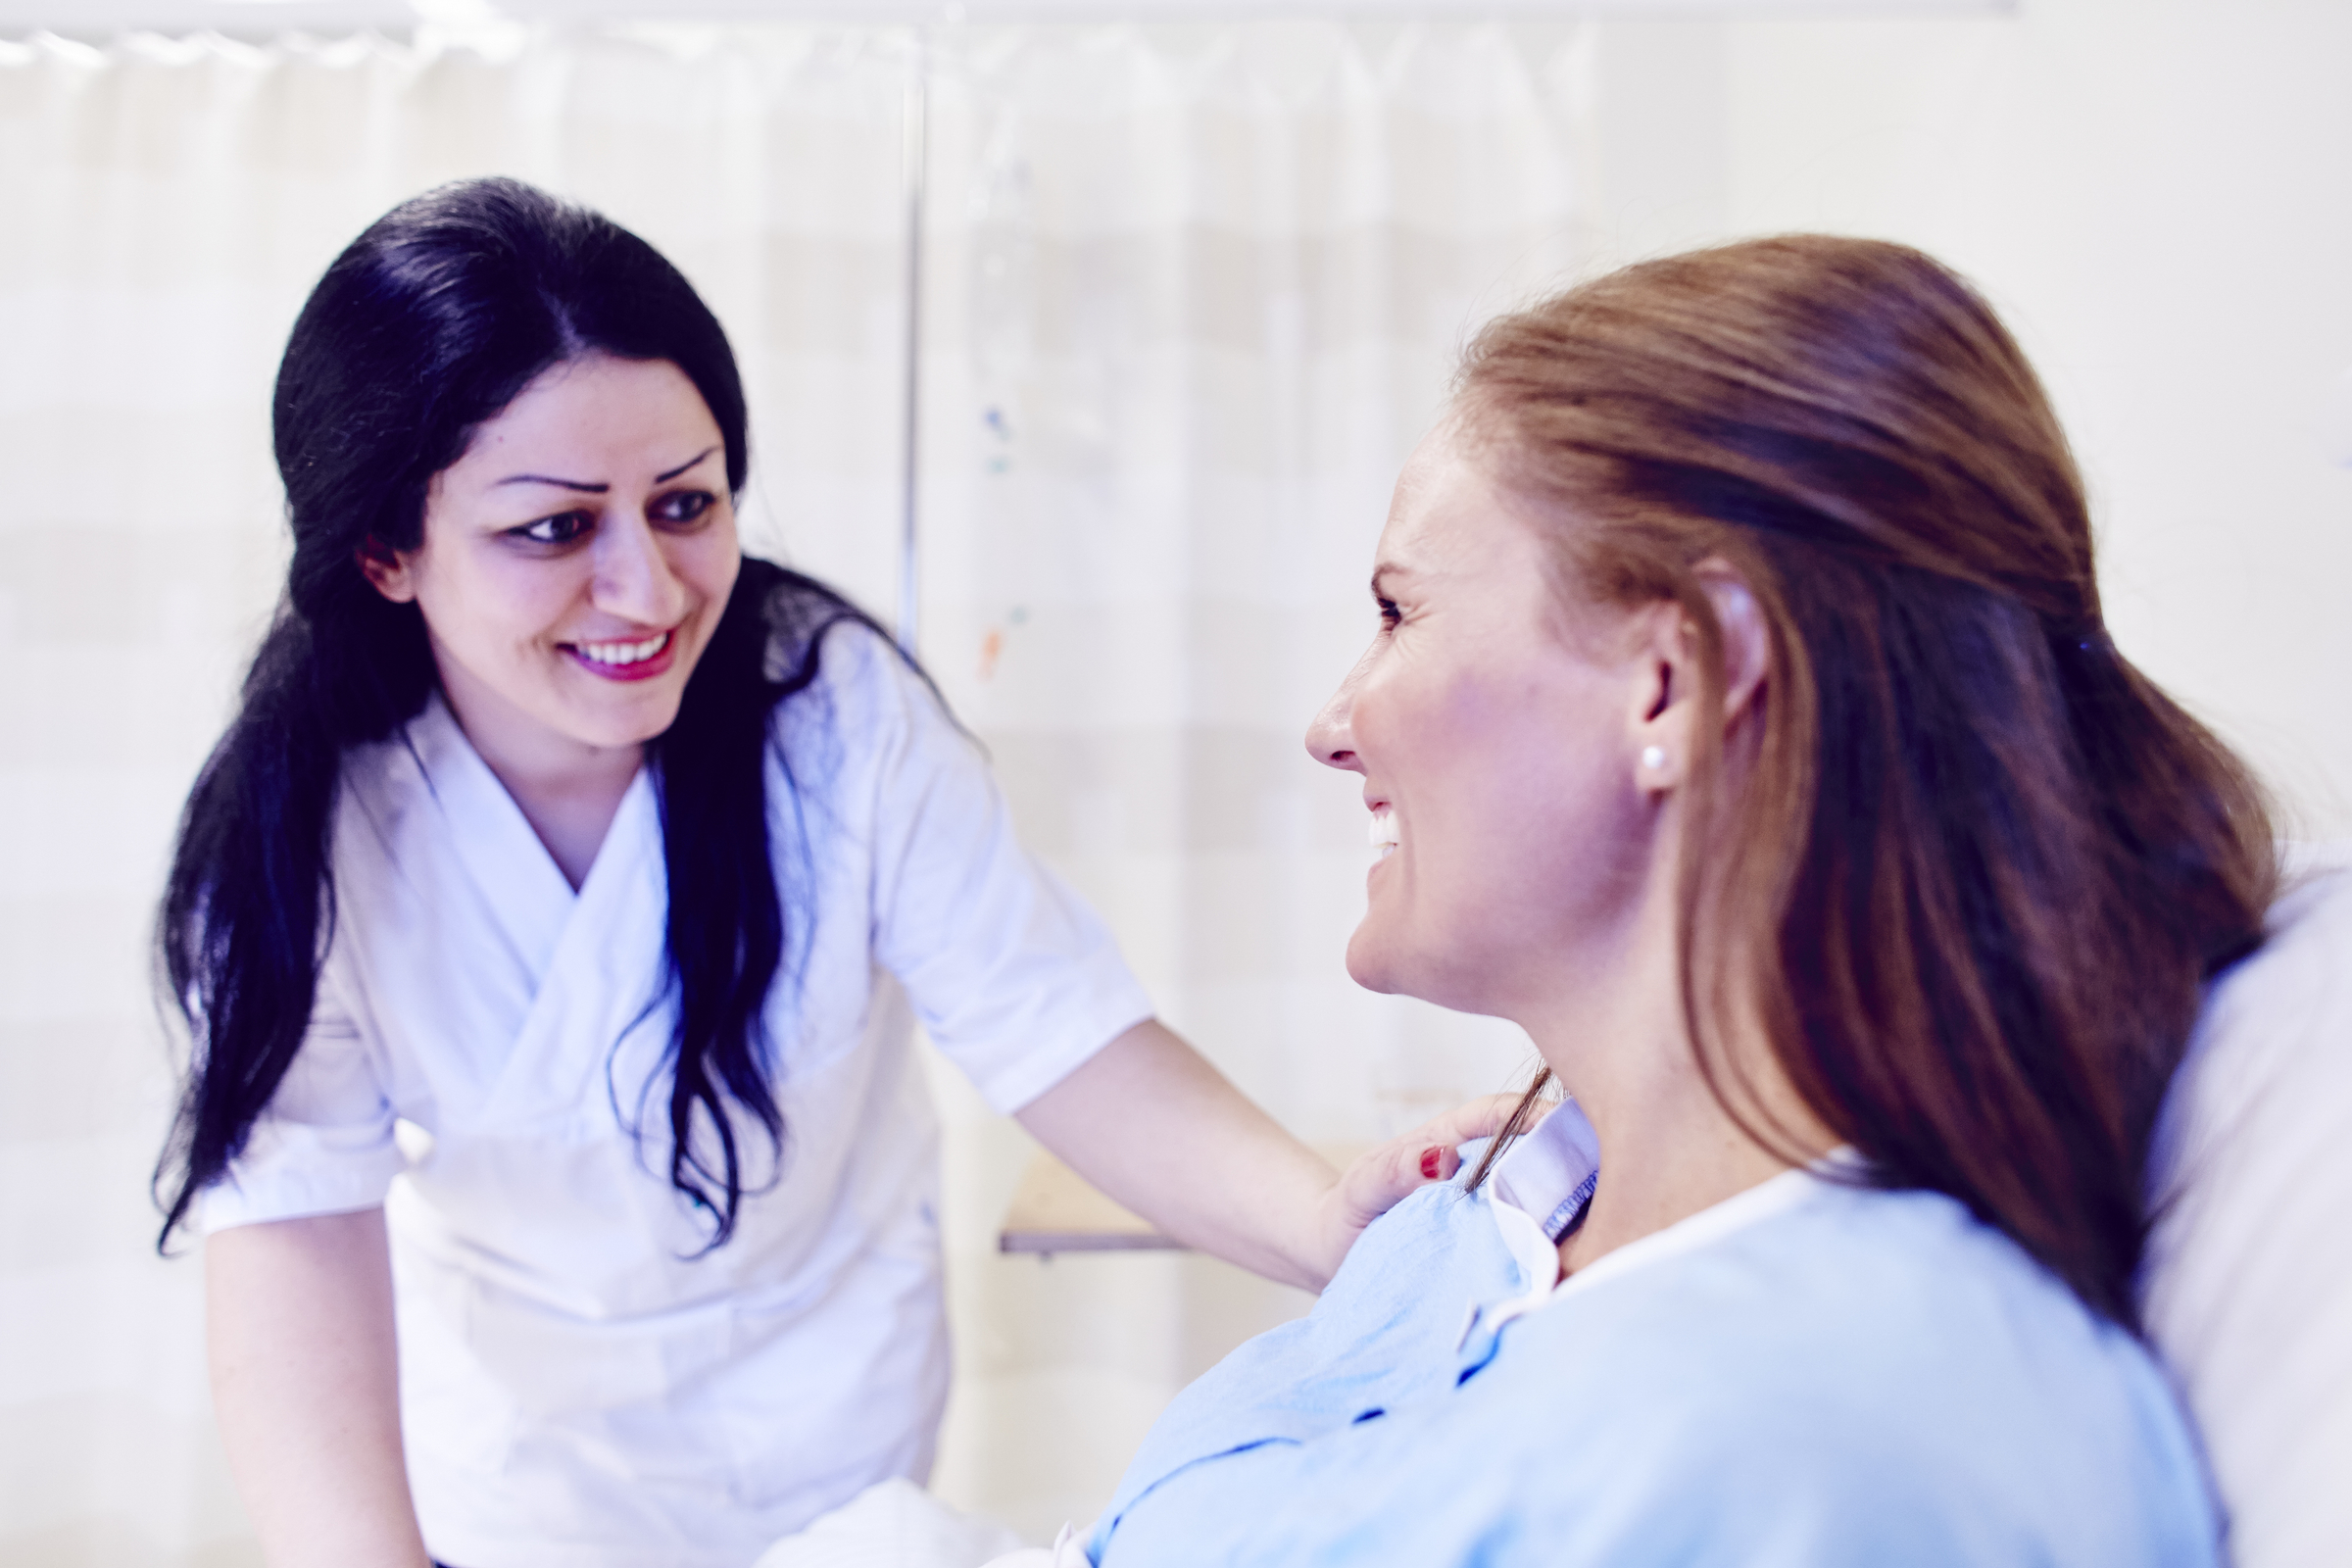 Nurse and patient smiling at each other